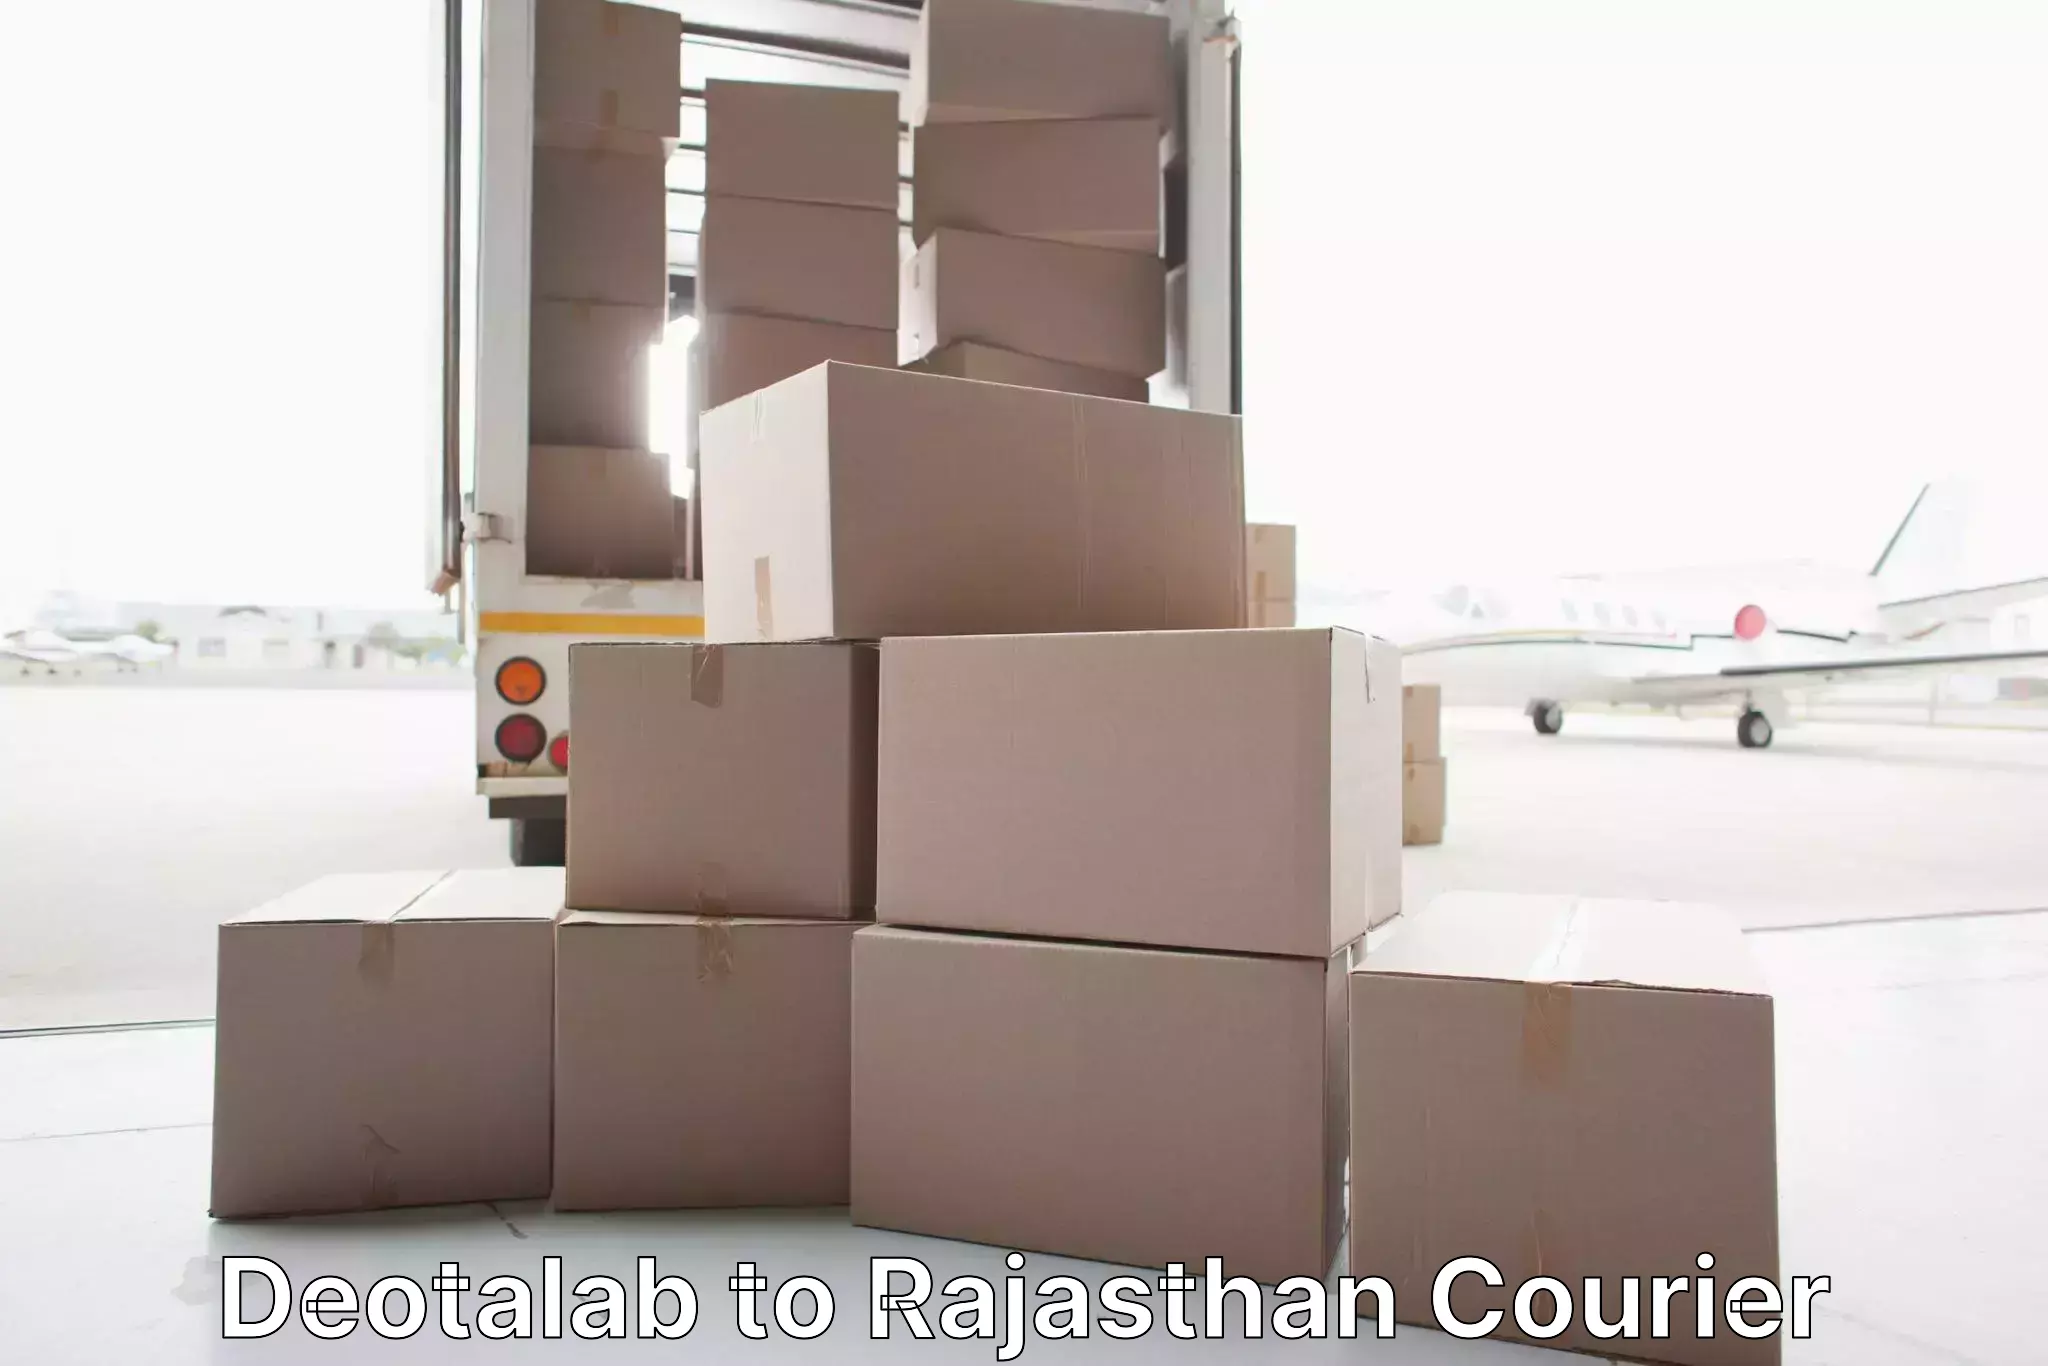 Furniture moving experts Deotalab to Rajasthan